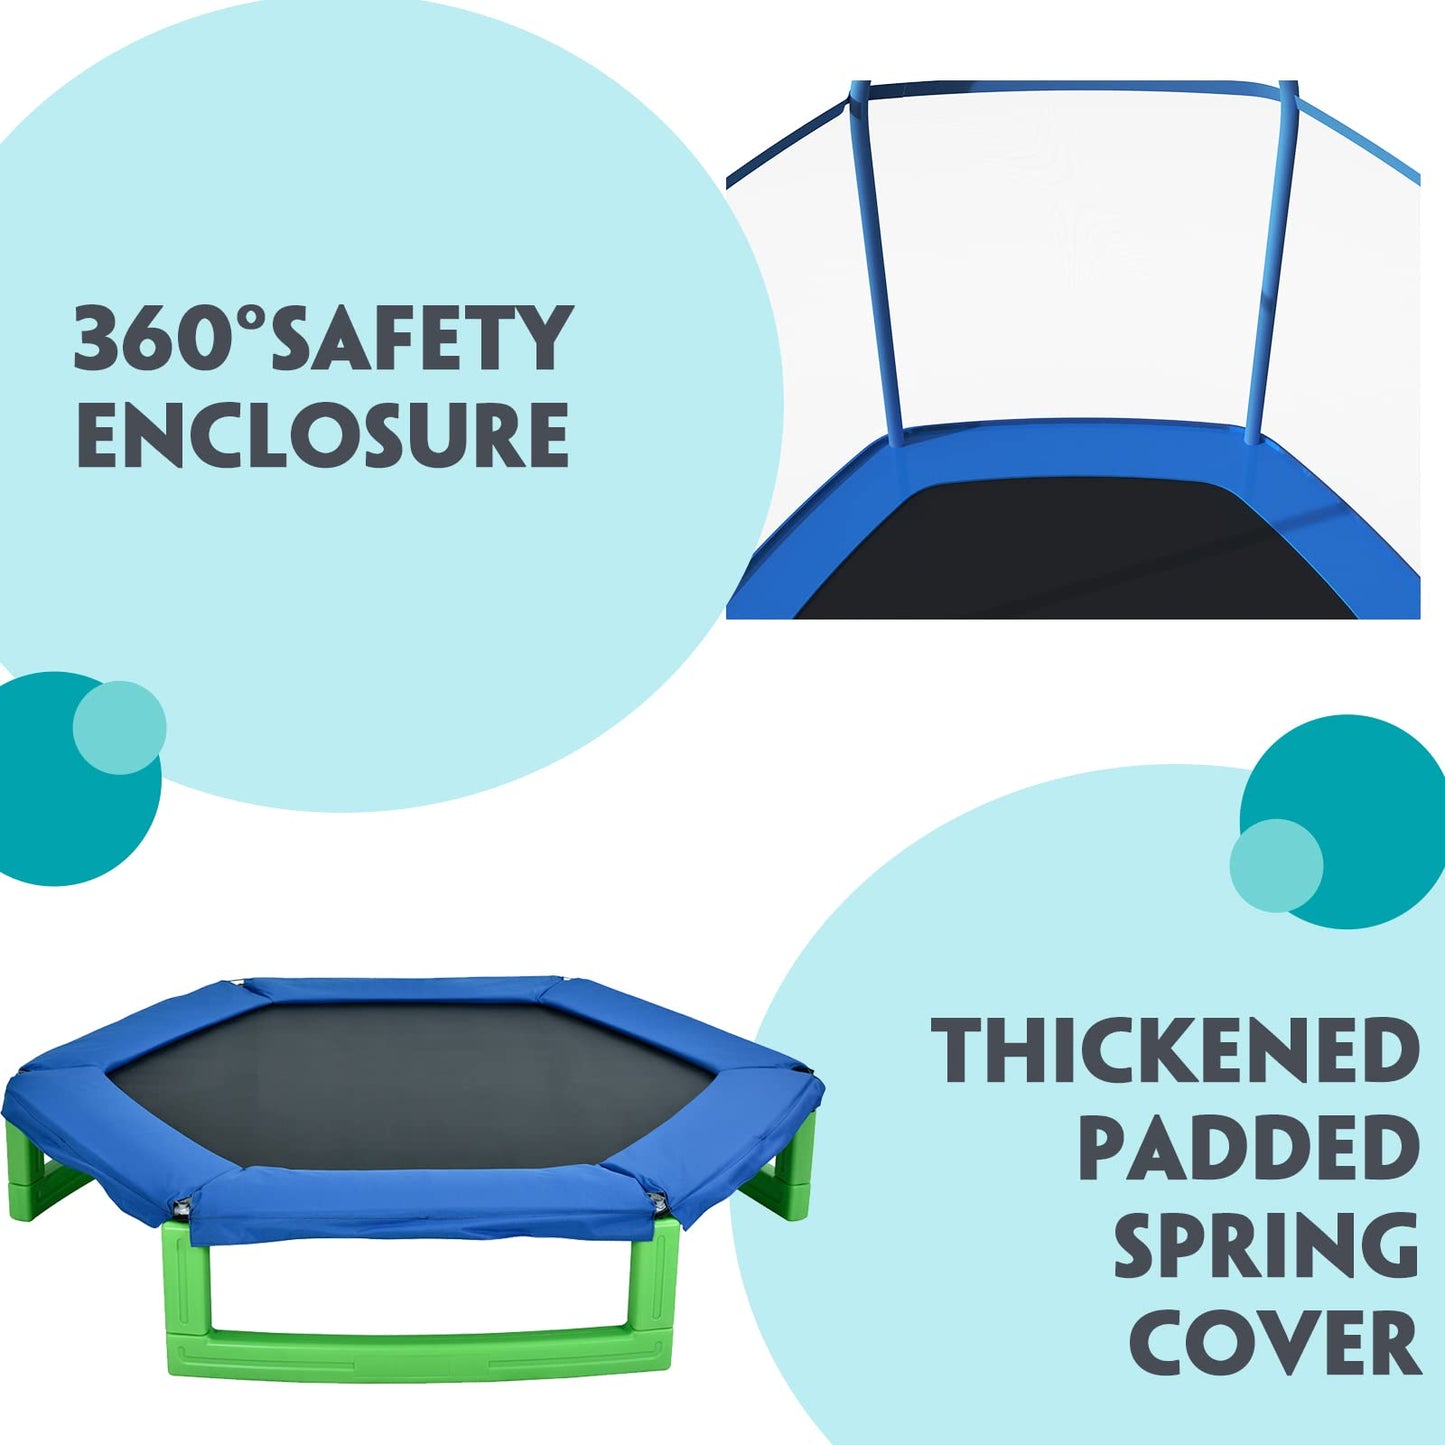 Lyromix 7FT Kids Trampoline for Toddlers, Indoor Mini Trampoline for Kids, Small Trampoline with Enclosure, Adult Fitness Trampoline for Indoor and Outdoor Use, Blue